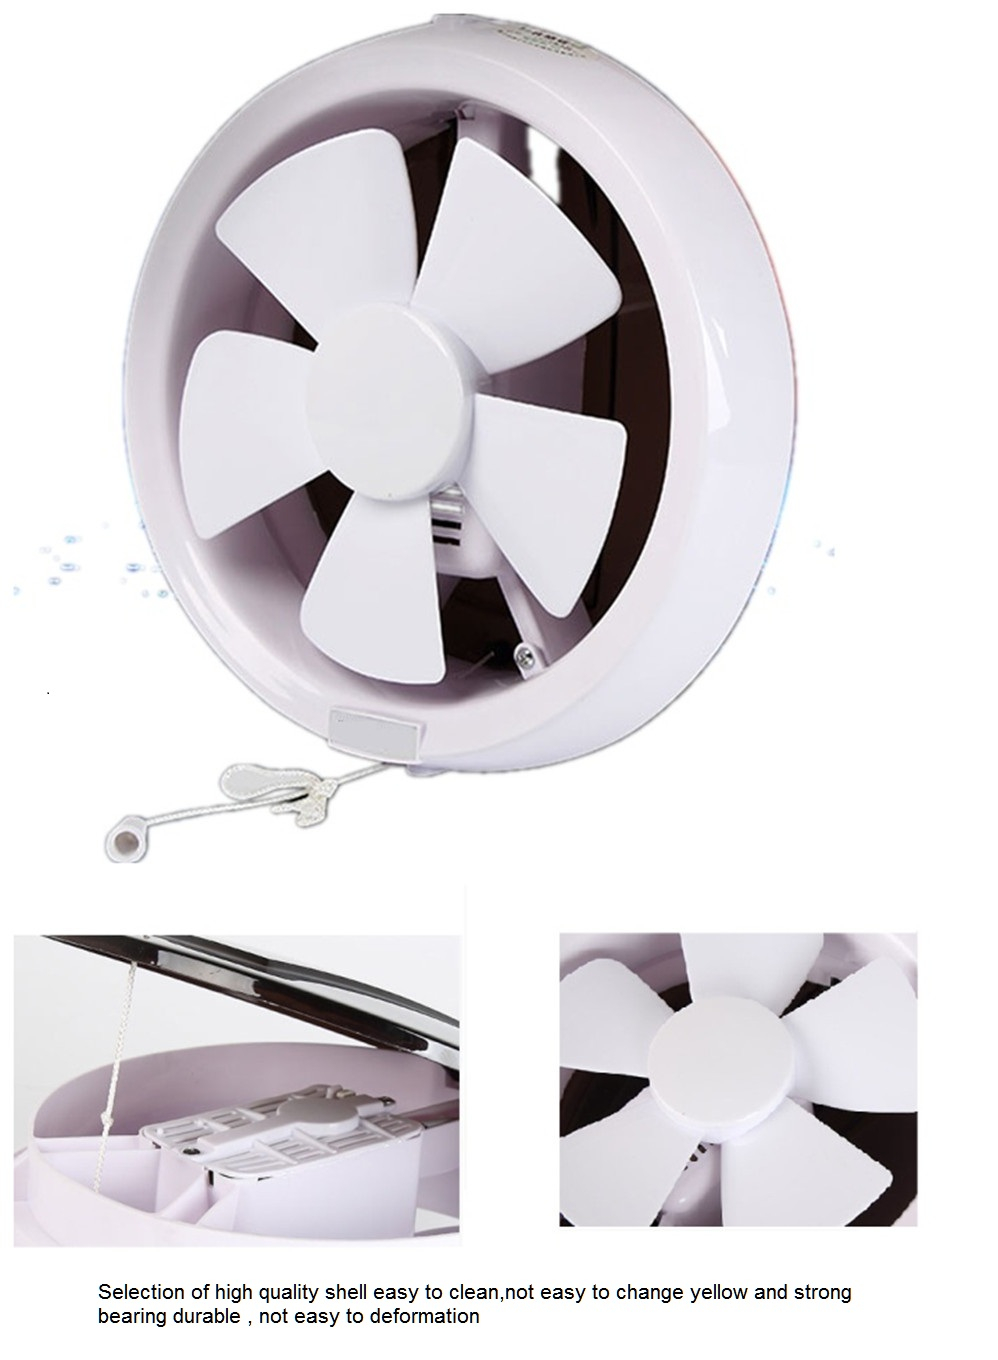 6 Inch Mini Bathroom Round Exhaust Fan Ventilation With Switch Control To Iraq Oman Dubai View Bathroom Exhaust Fan Hengjun Product Details From pertaining to sizing 998 X 1360